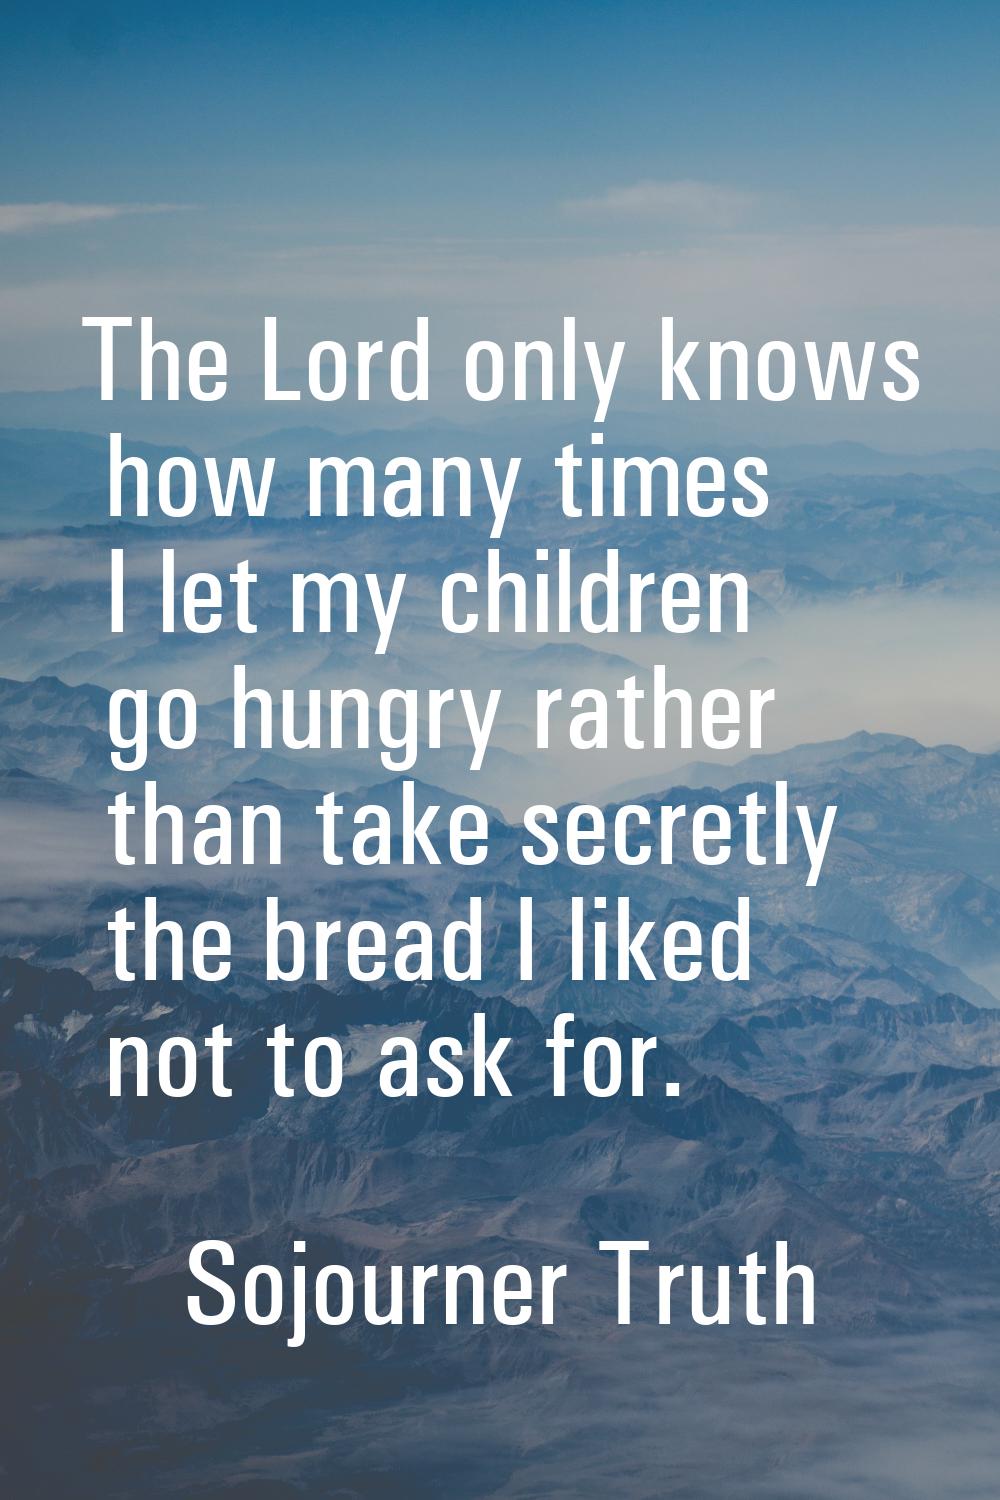 The Lord only knows how many times I let my children go hungry rather than take secretly the bread 